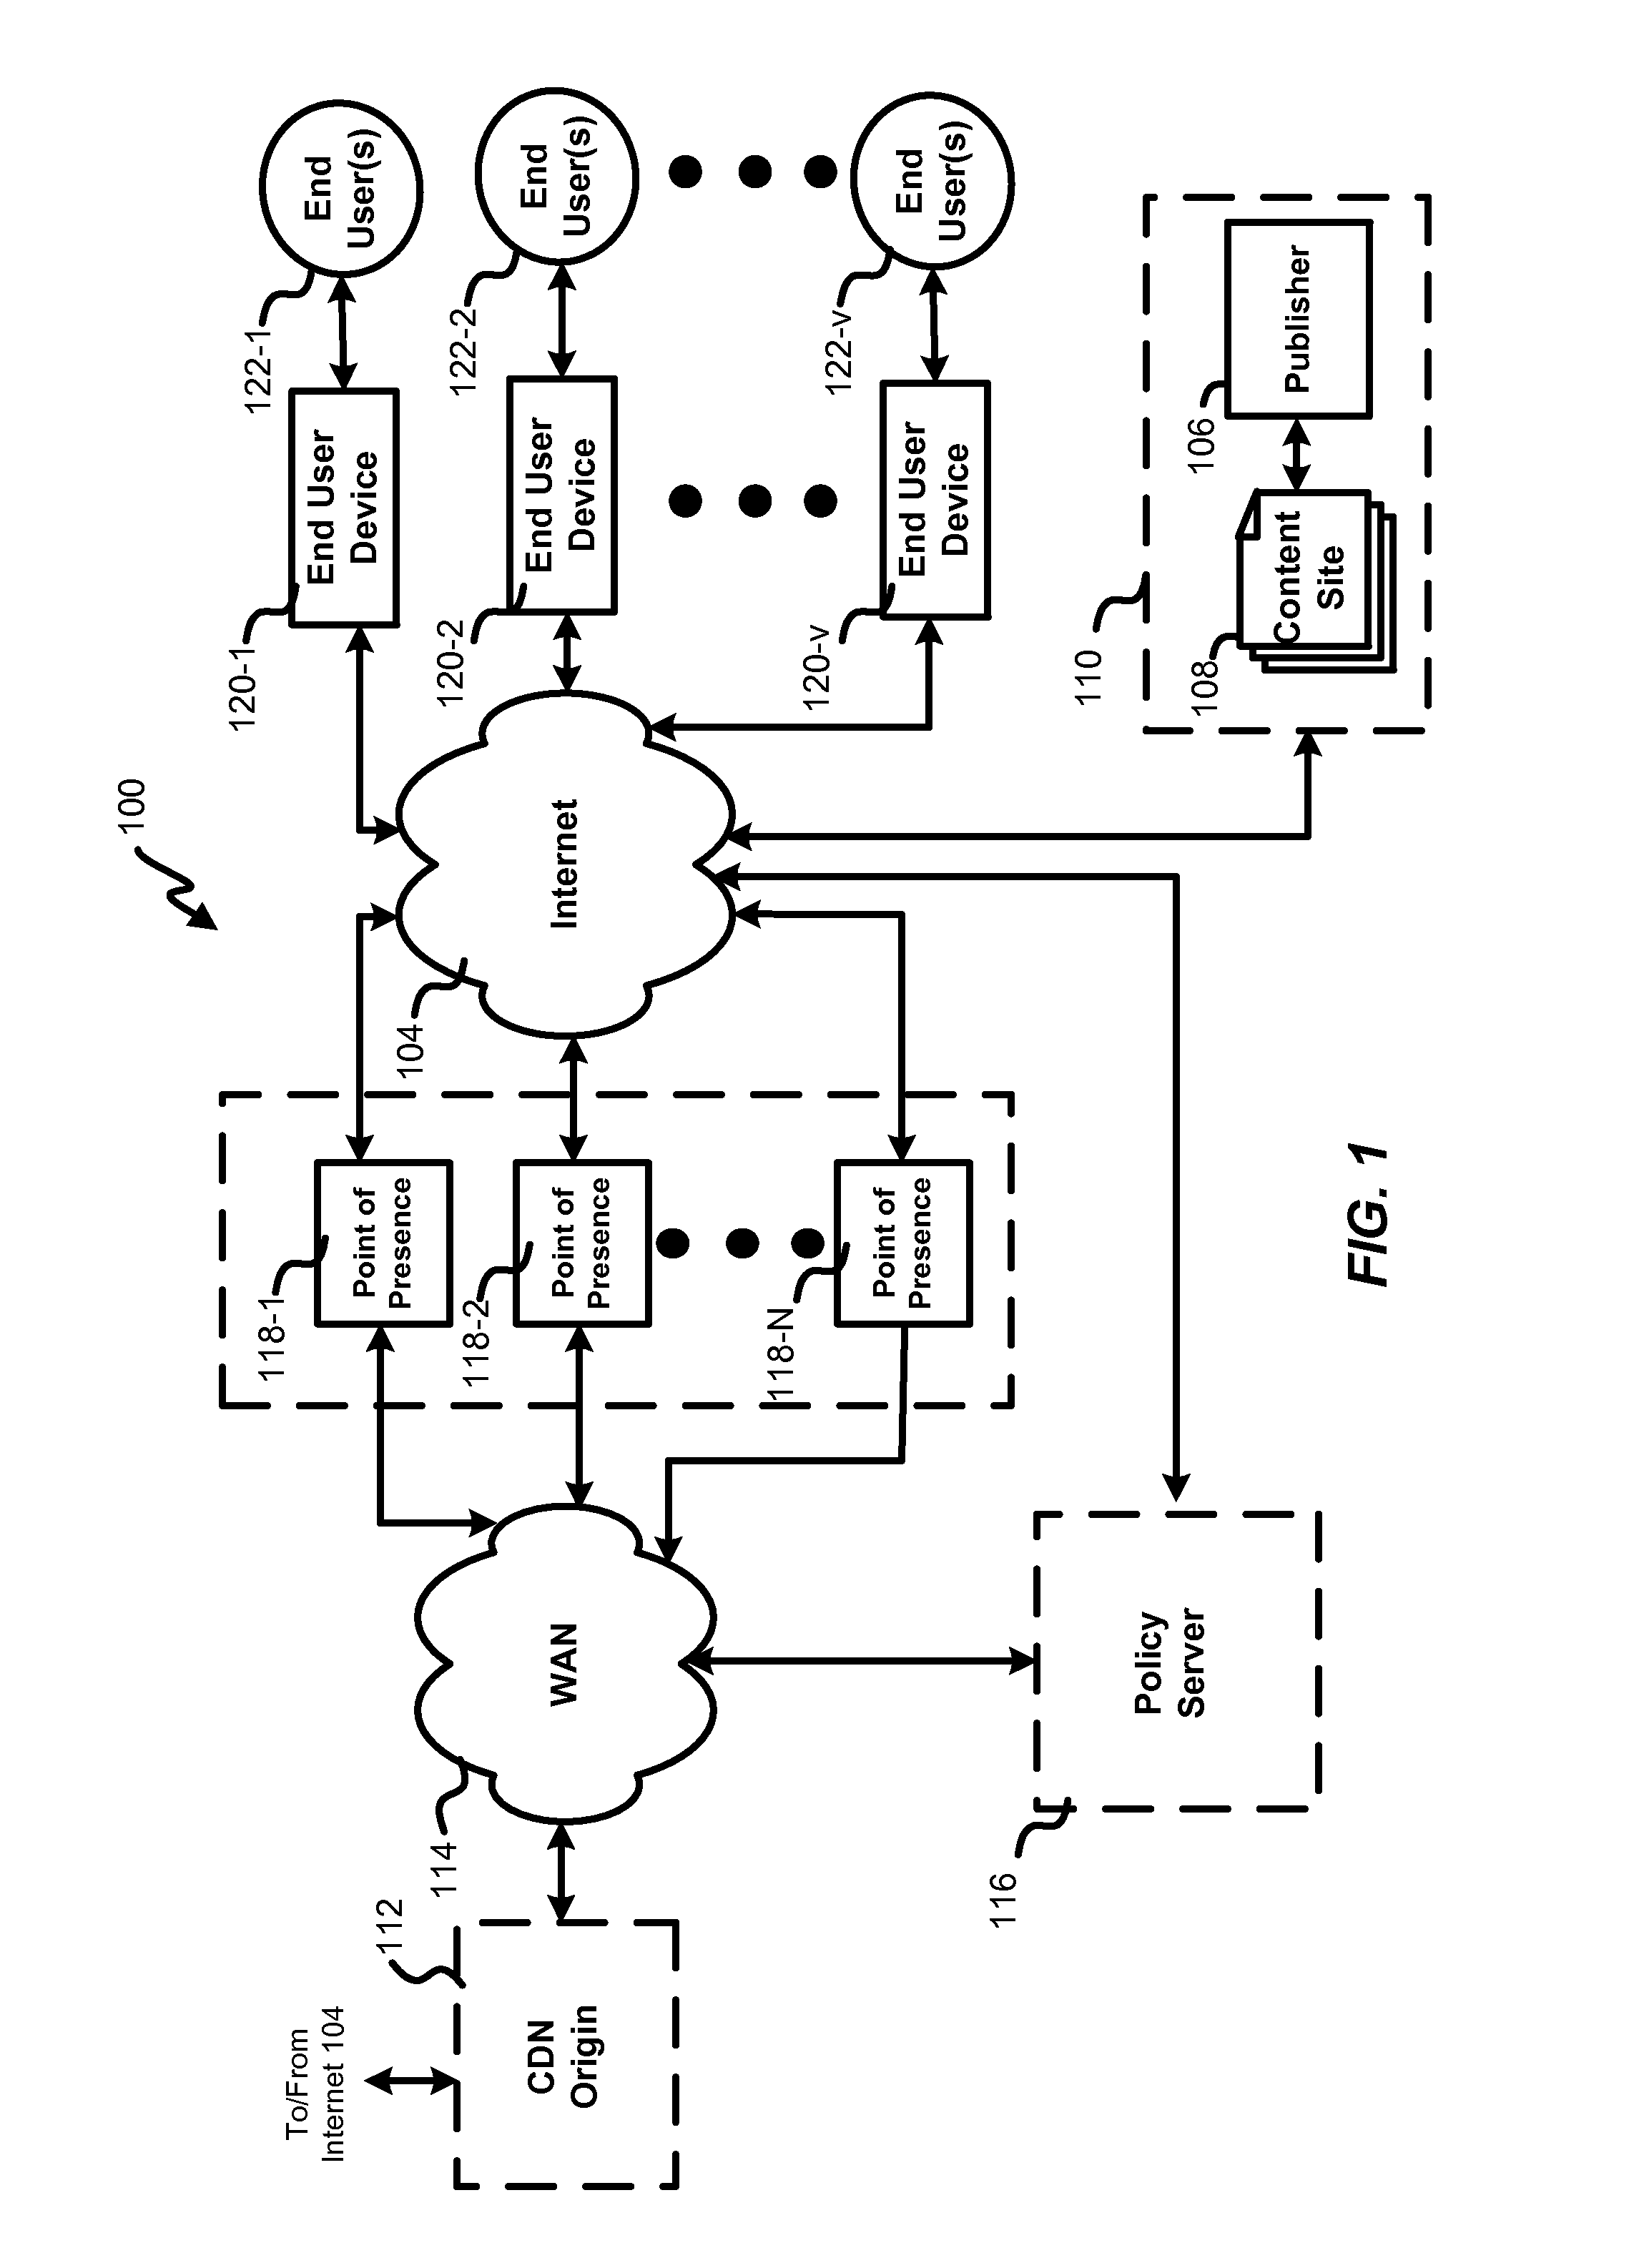 System and method for delivery of content objects